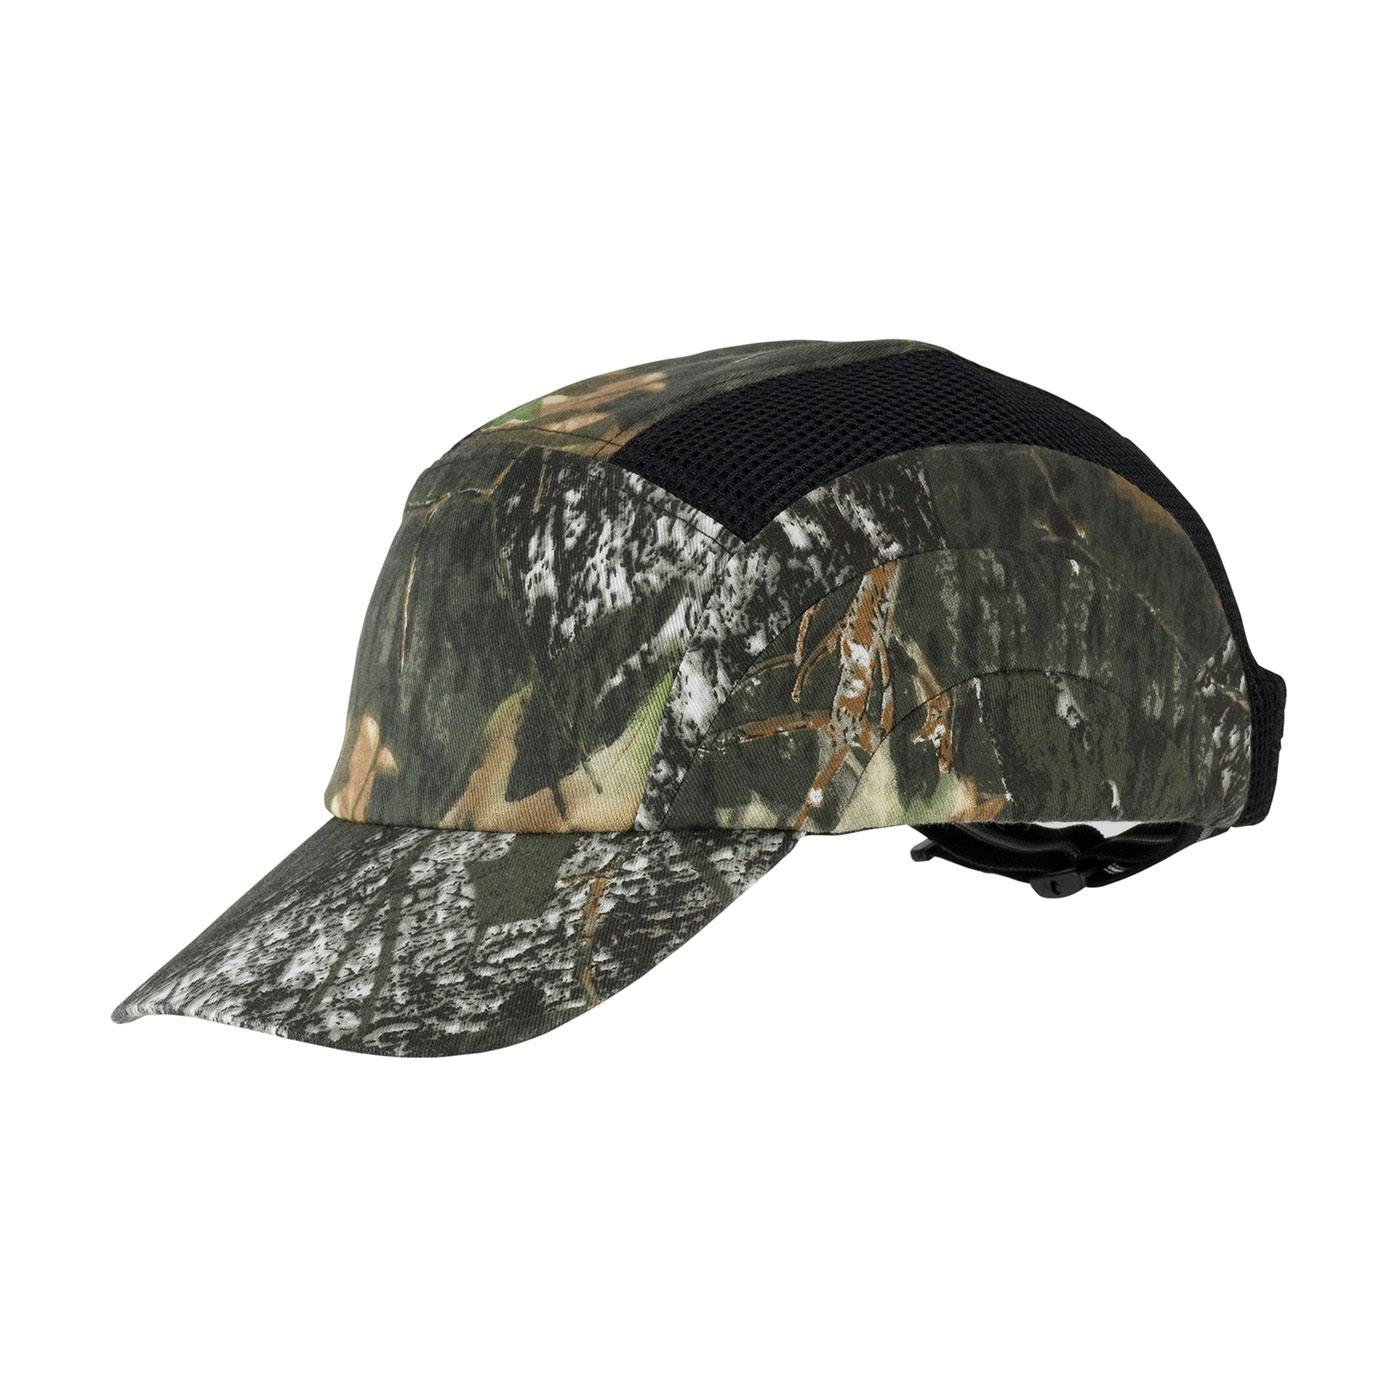 Camouflage Baseball Style Bump Cap with HDPE Protective Liner and Adjustable Back, Camouflage (282-ABR170-CAMO) - OS_1